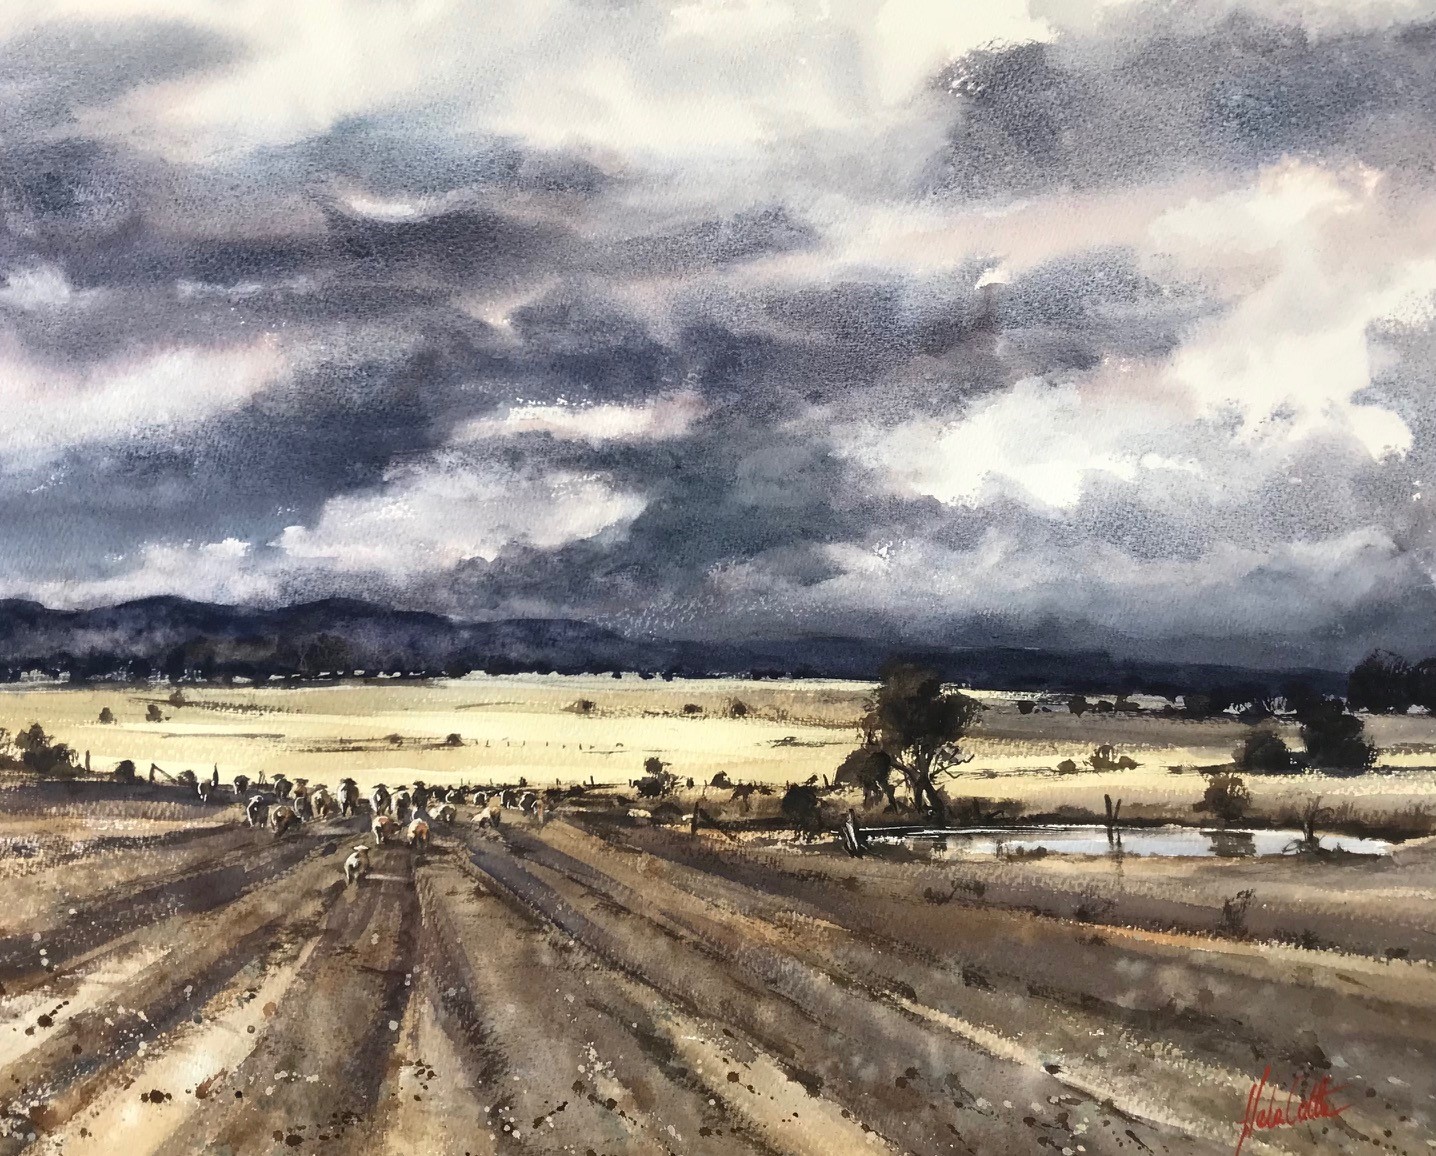 Welcome rain over thirsty land, Macedon Ranges Victoria by Helen Cottle | Lethbridge 20000 2021 Finalists | Lethbridge Gallery